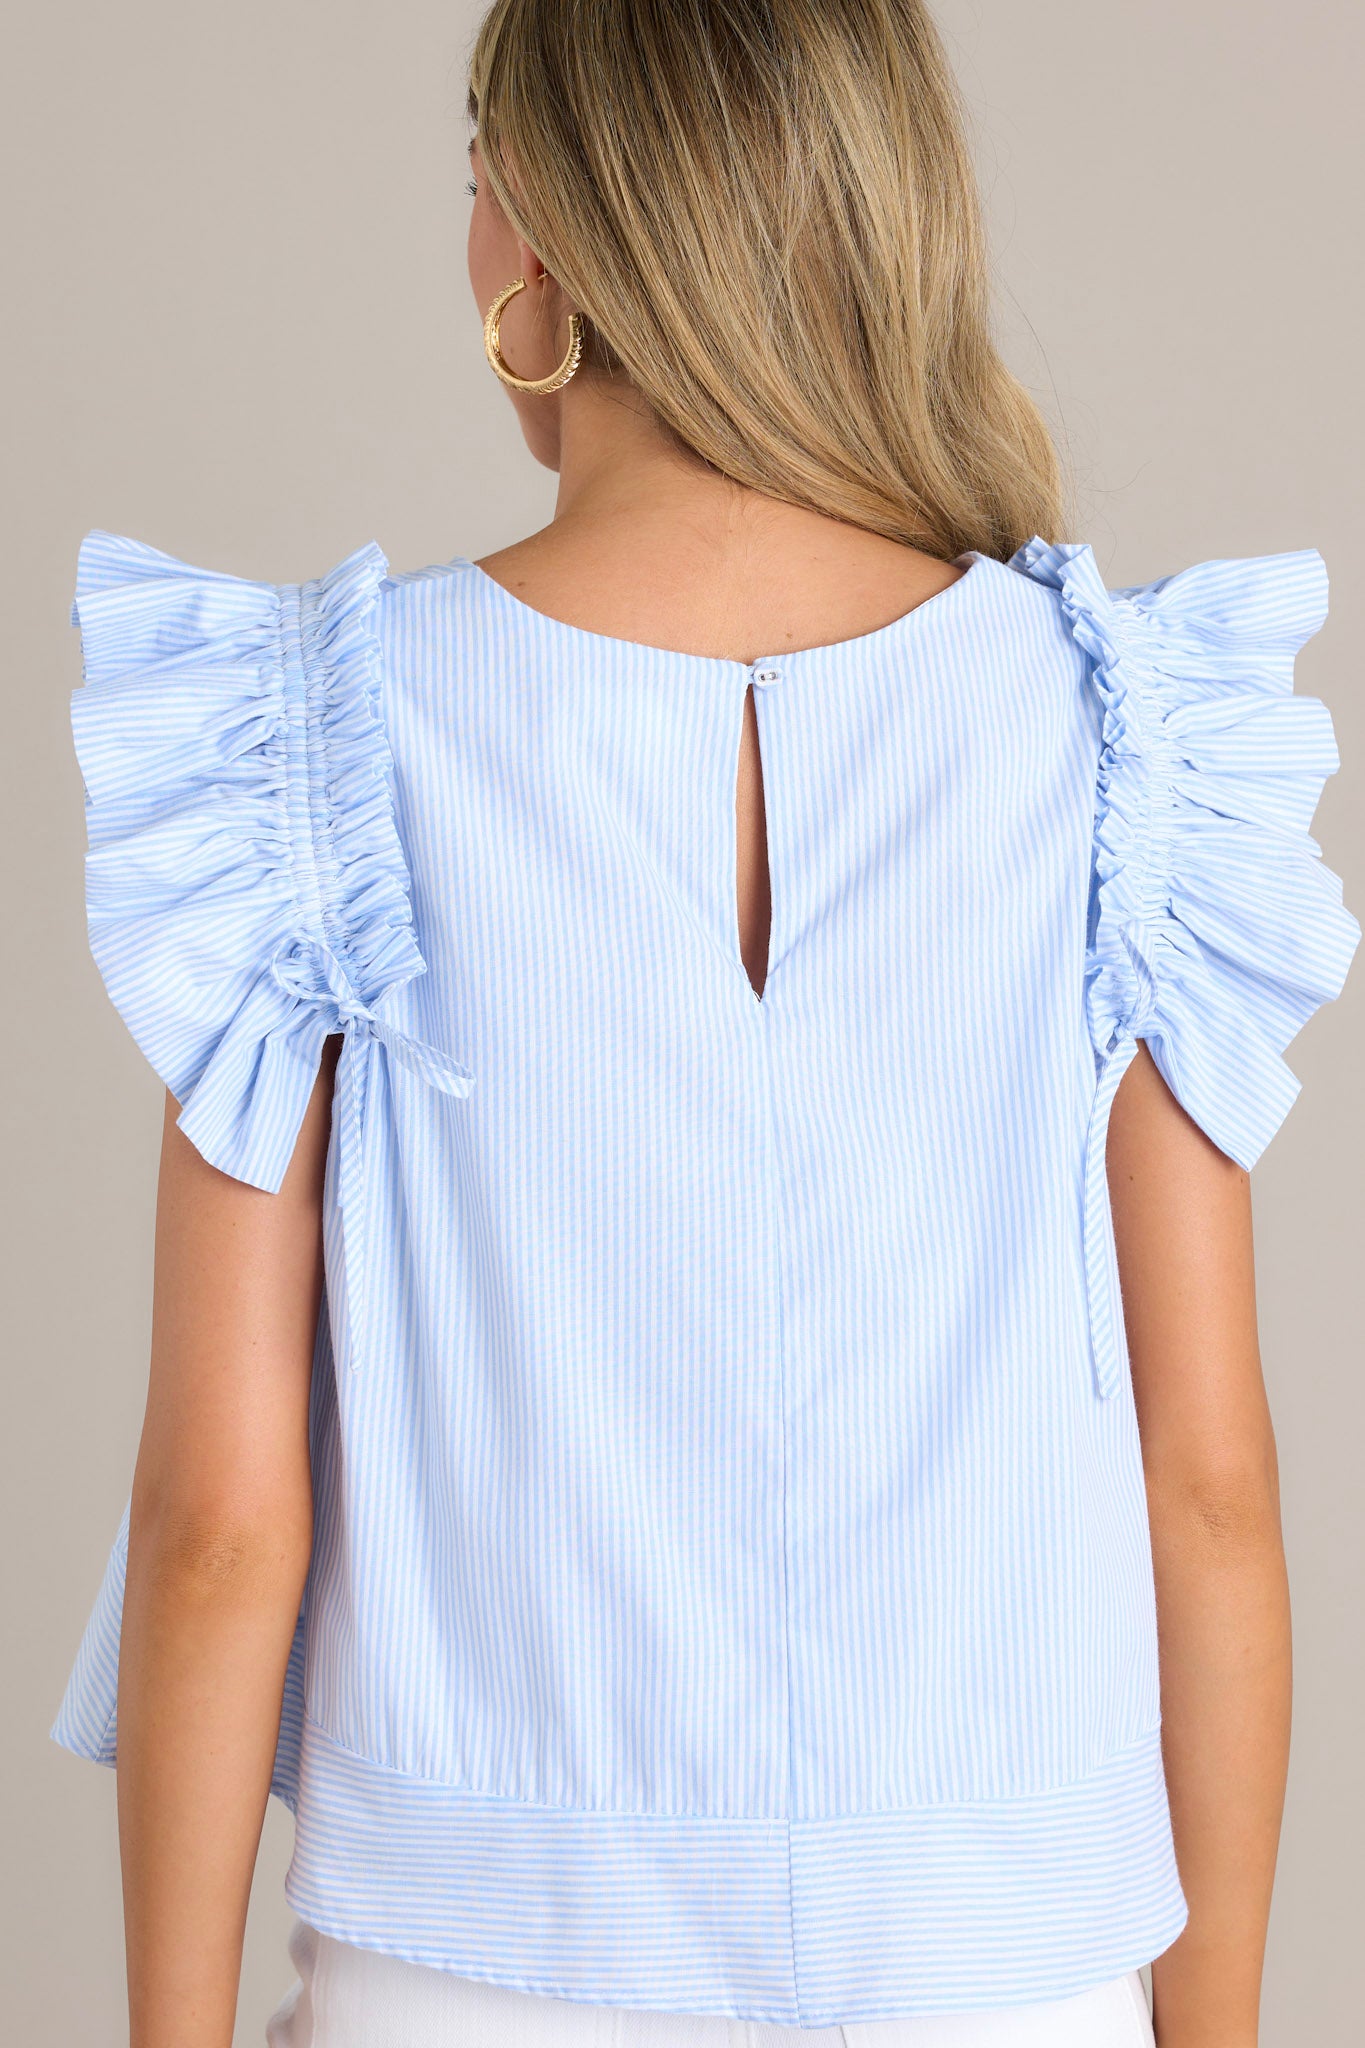 Back view of this blue stripe top featuring a relaxed fit, crew neckline, vertical stripes, and layered ruffle sleeves with adjustable bows.